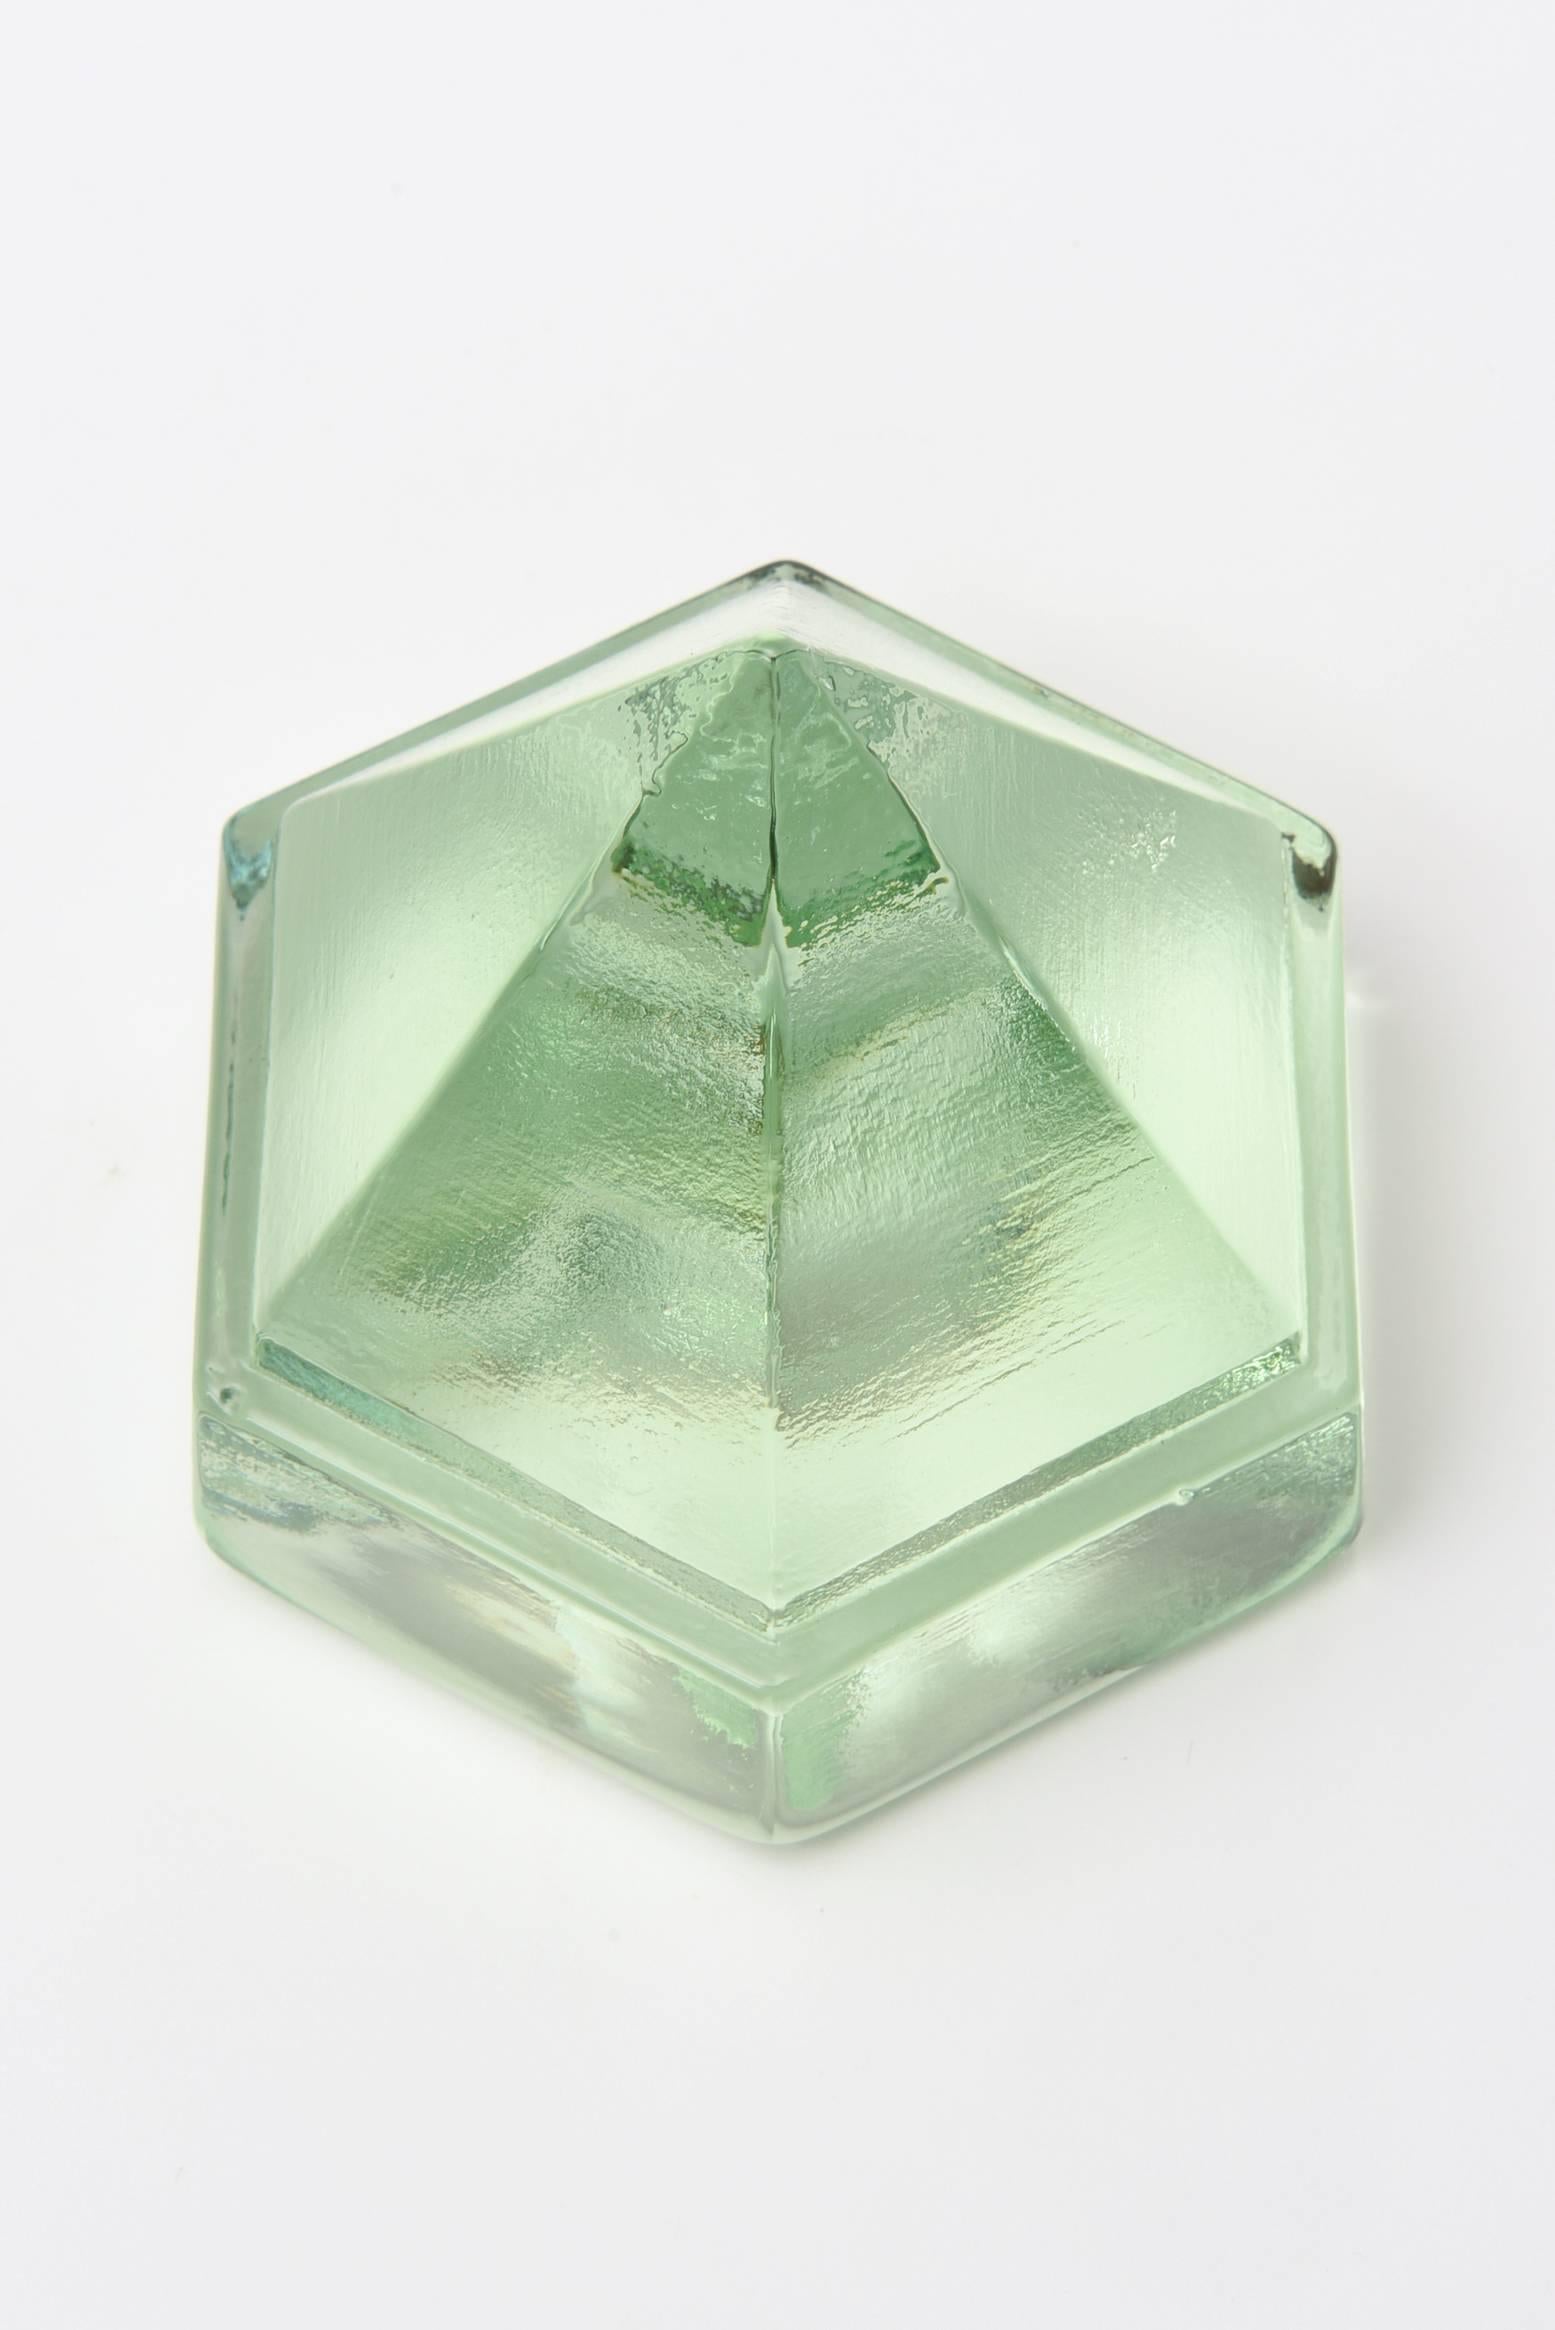 This lovely heavy glass object has pebbled or textured glass. It was used on a ship to beam light.
The mint green meets sage green takes on different hues depending on the light.
It is more vibrant in depth of color in person.


